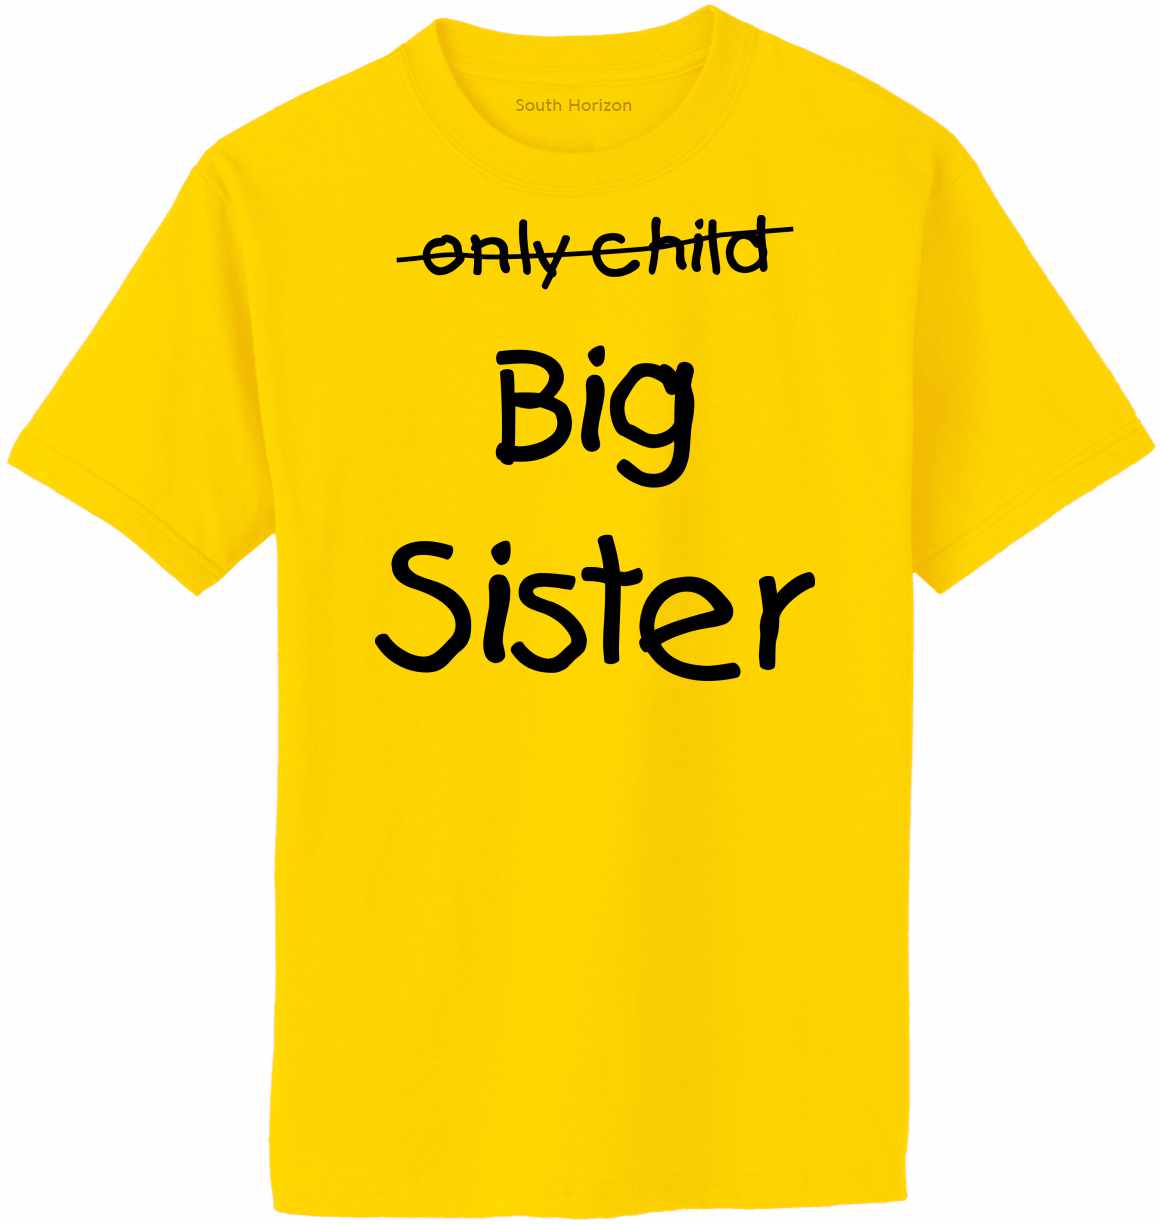 Only Child BIG SISTER on Adult T-Shirt (#968-1)